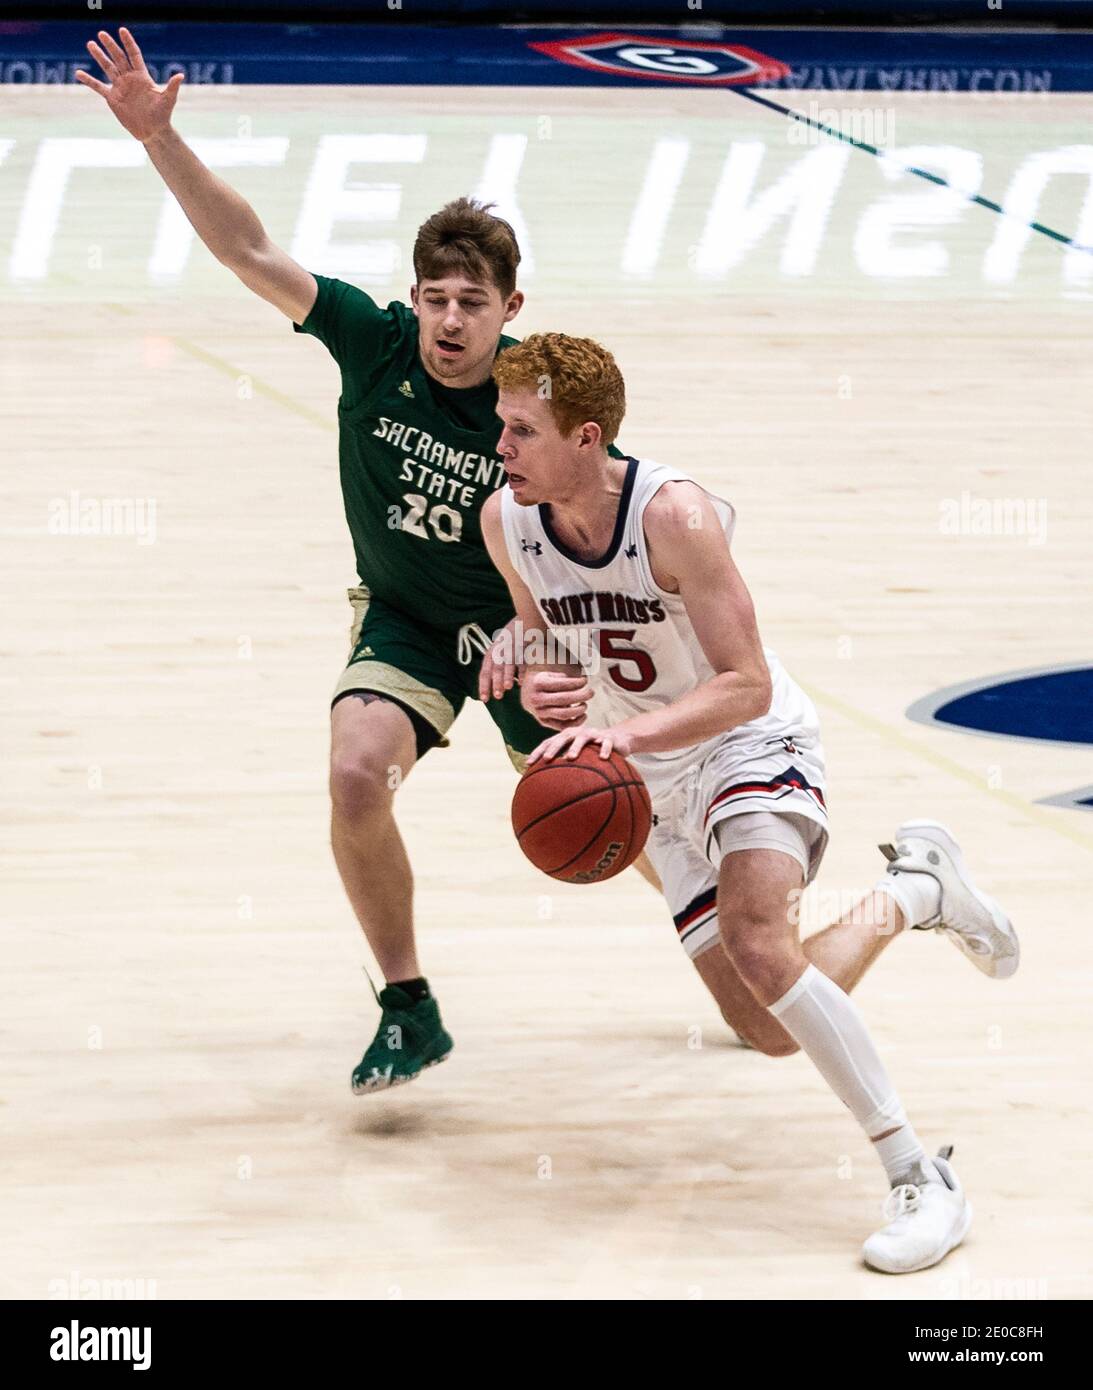 Moraga, CA U.S. 30th Dec, 2020. A. St. Mary's Gaels guard Jabe Mullins (5) drives to the hoop during the NCAA Men's Basketball game between Sacramento State Hornets and the Saint Mary's Gaels 63-45 win at McKeon Pavilion Moraga Calif. Thurman James/CSM/Alamy Live News Stock Photo